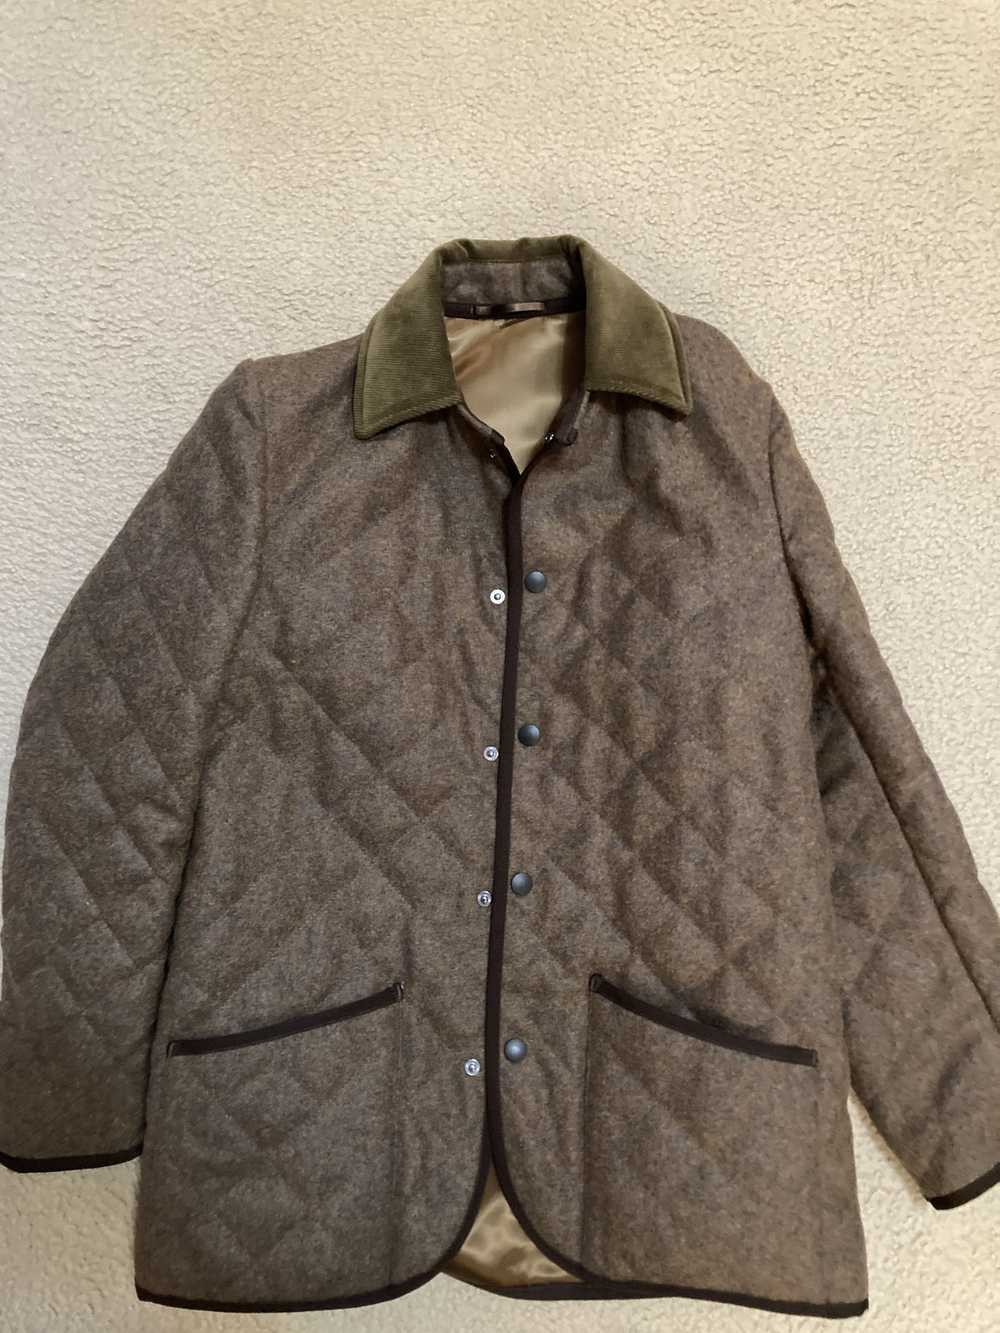 Paul Stuart Quilted Loden Barn Jacket - image 1